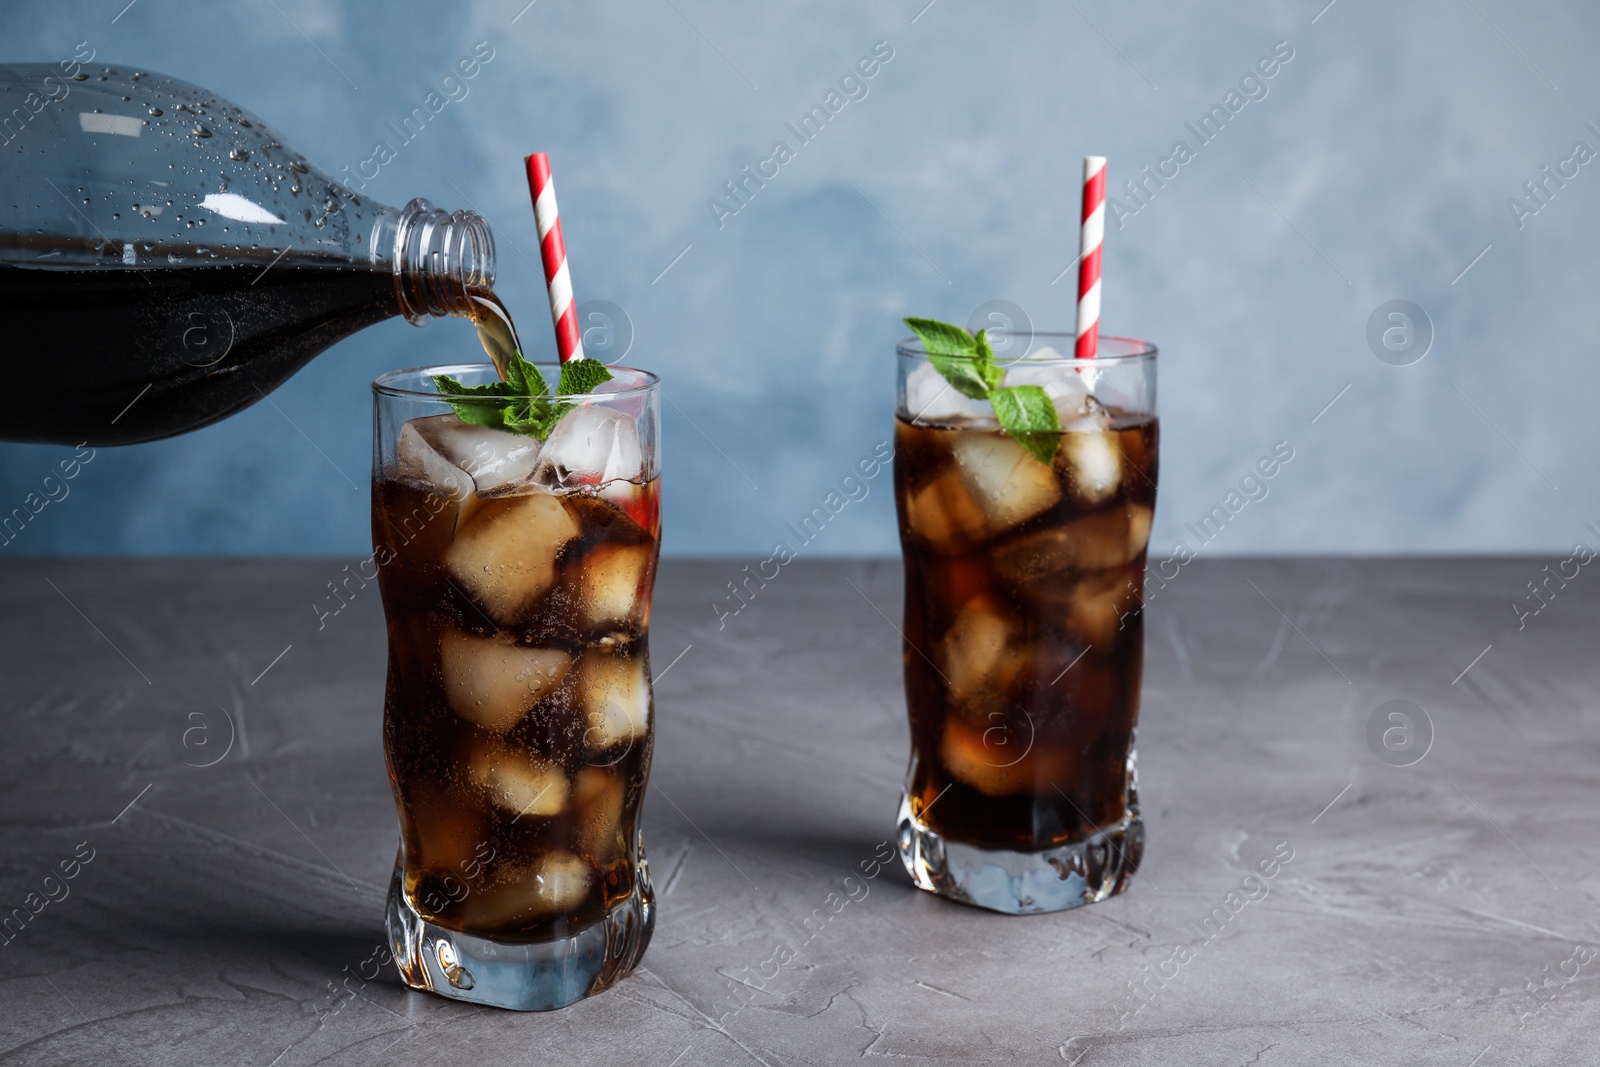 Photo of Pouring refreshing soda drink into glass on grey table against blue background